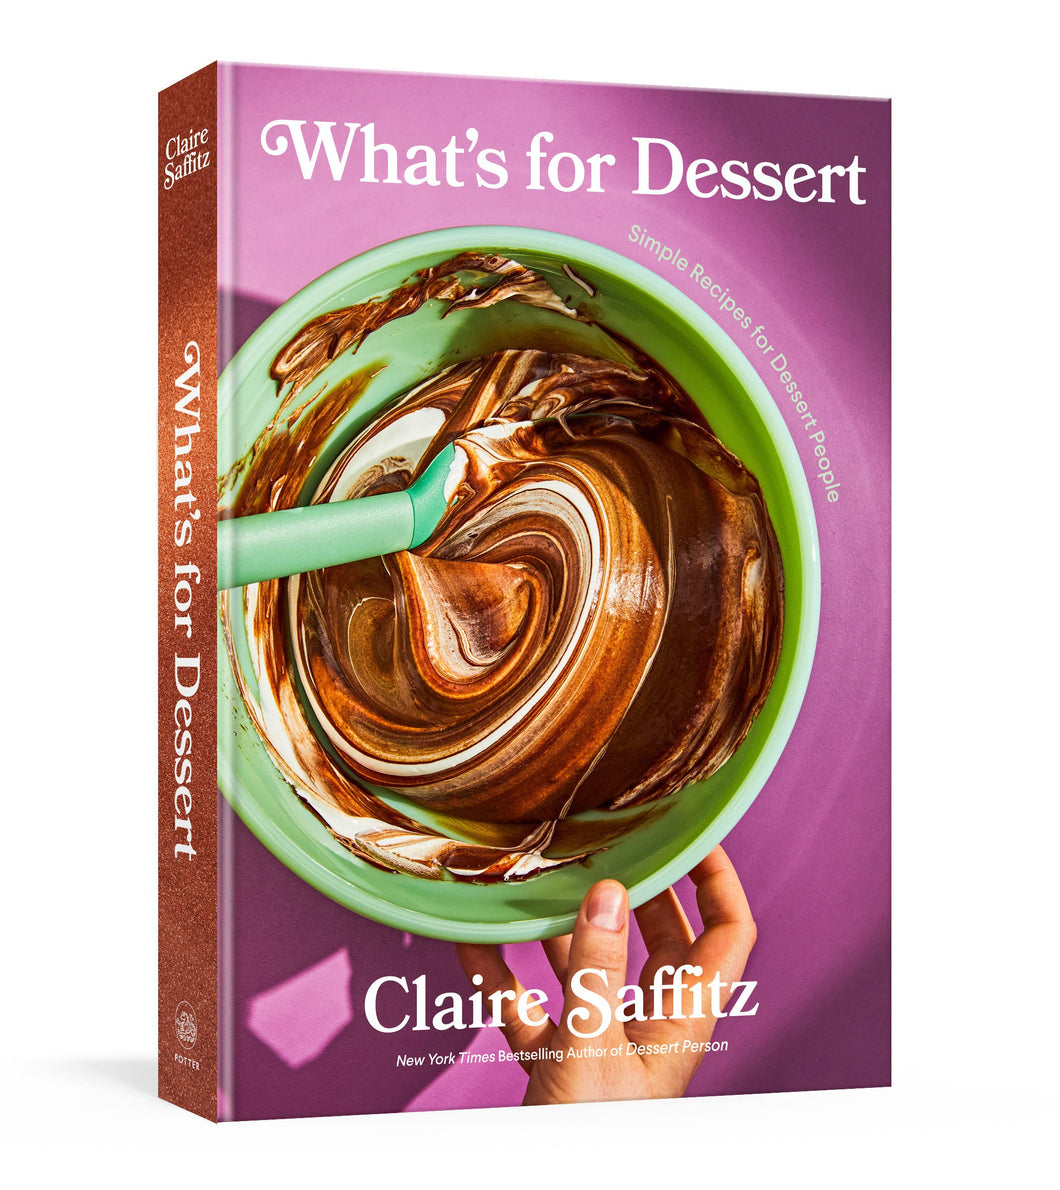 What's for Dessert by Claire Saffitz